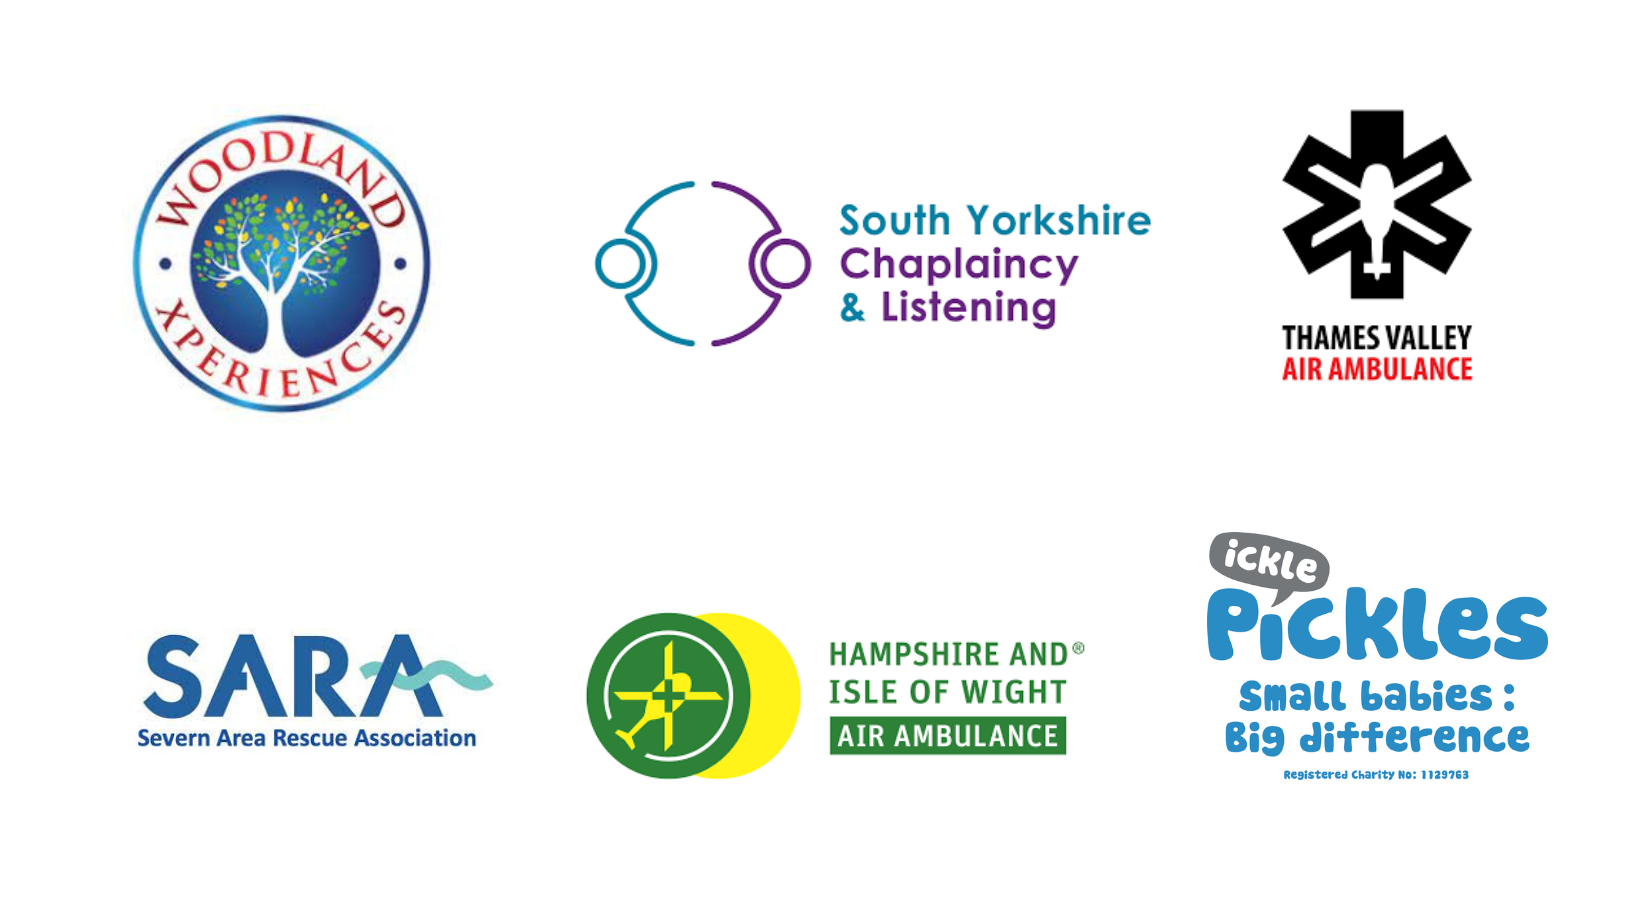 Logos of new funded projects: Woodland Xperiences, South Yorkshire Chaplaincy and Listening, Thames Valley Air Ambulance, SARA, Hampshire and Isle of Wight Air Ambulance, Ickle Pickles charity. 